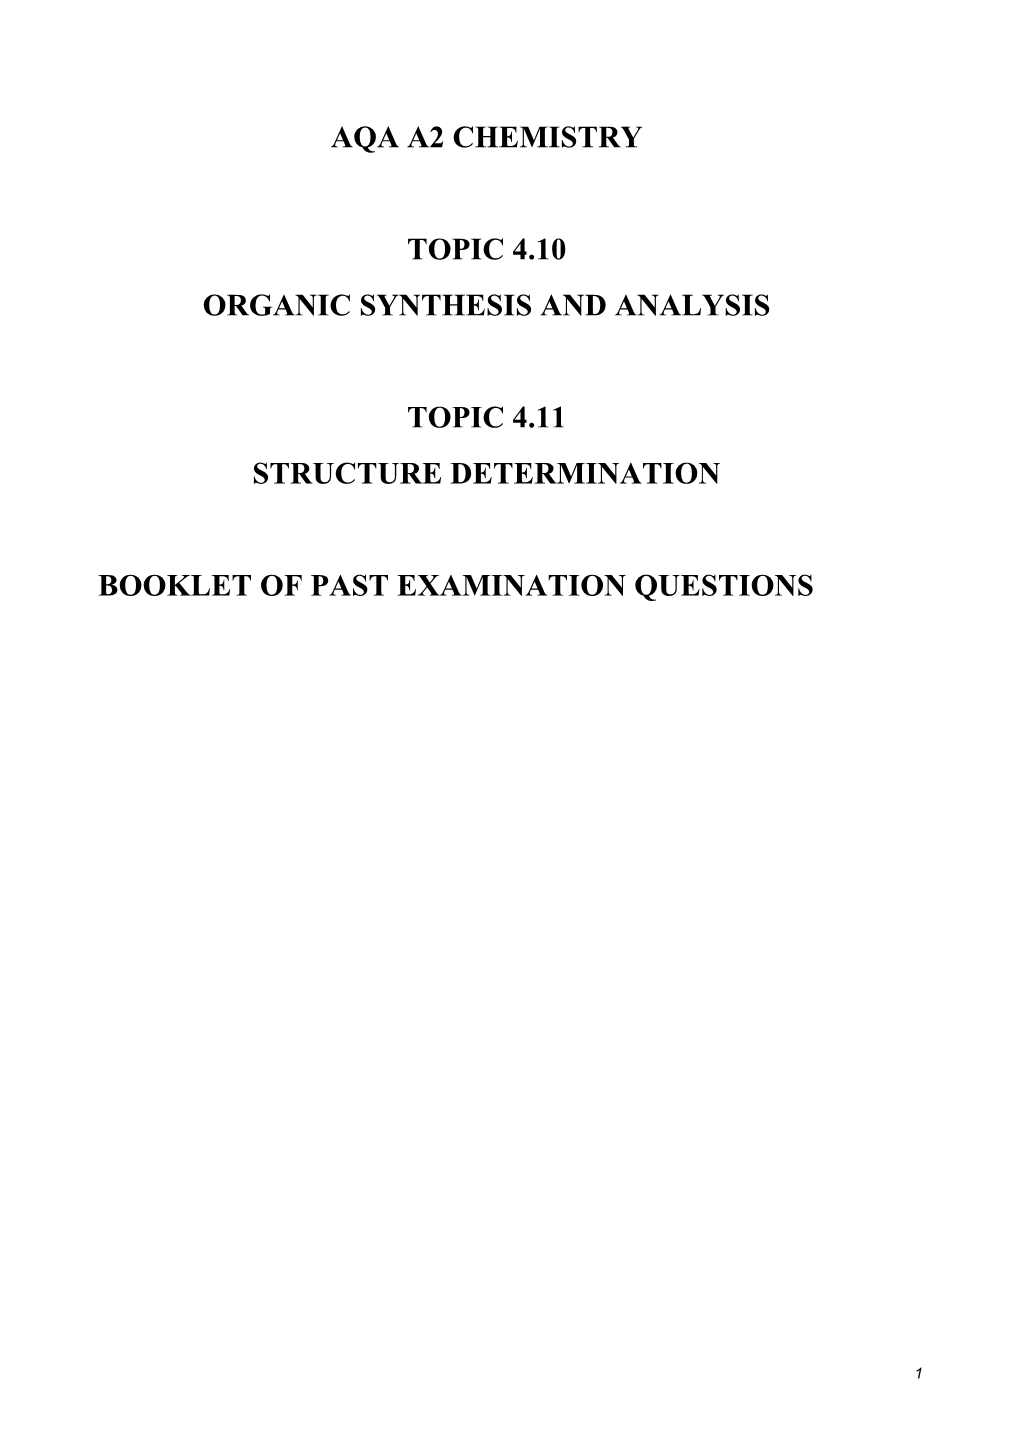 Organic Synthesis and Analysis